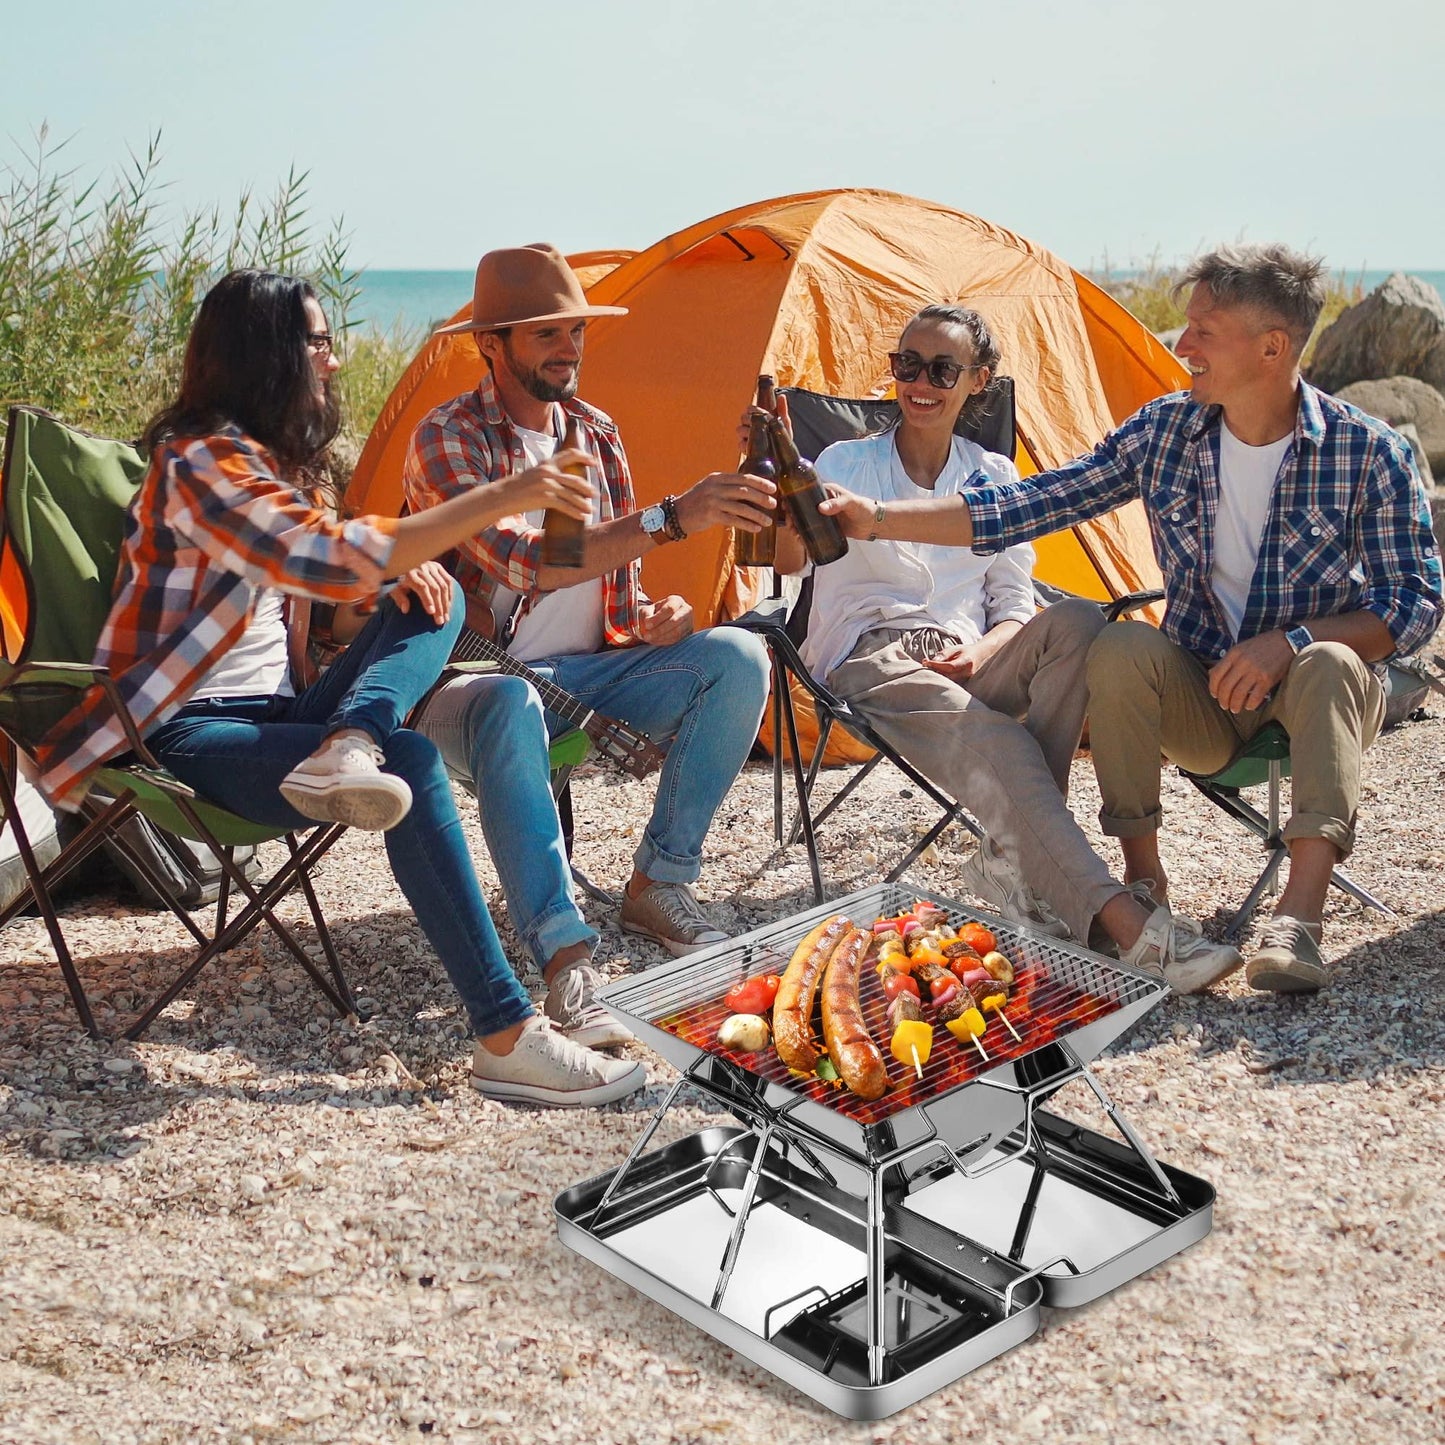 Fltom Portable Charcoal Grill, Folding Stainless Steel Camping Fire Pit, Backpacking Grill for Outdoor Cooking Hiking Camping Picnics - CookCave